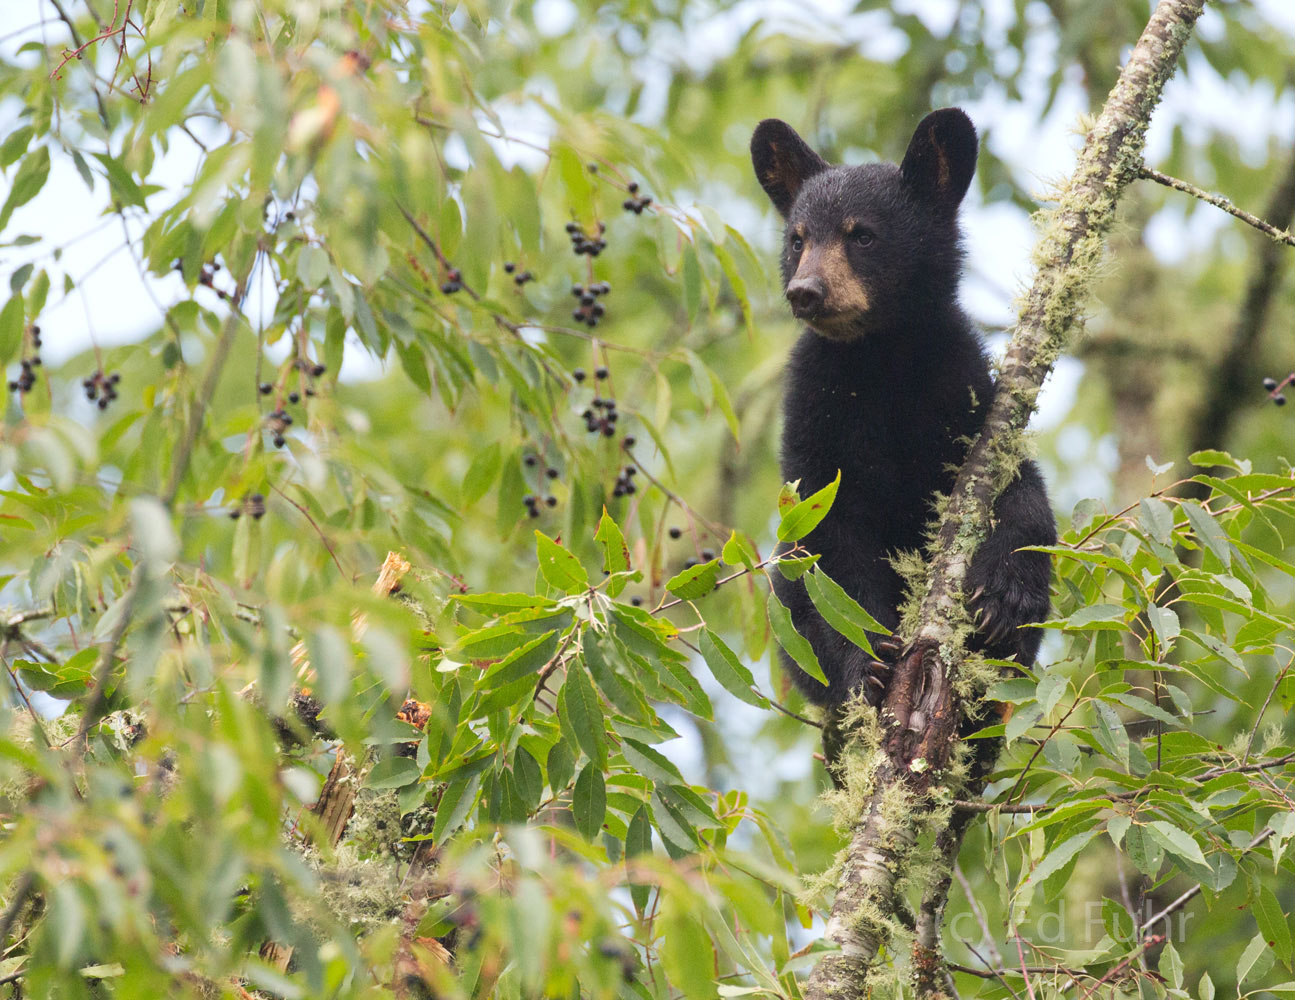 A black bear cubs pauses from his feasting to check out mom and two siblings who are high atop an adjacent cherry tree.